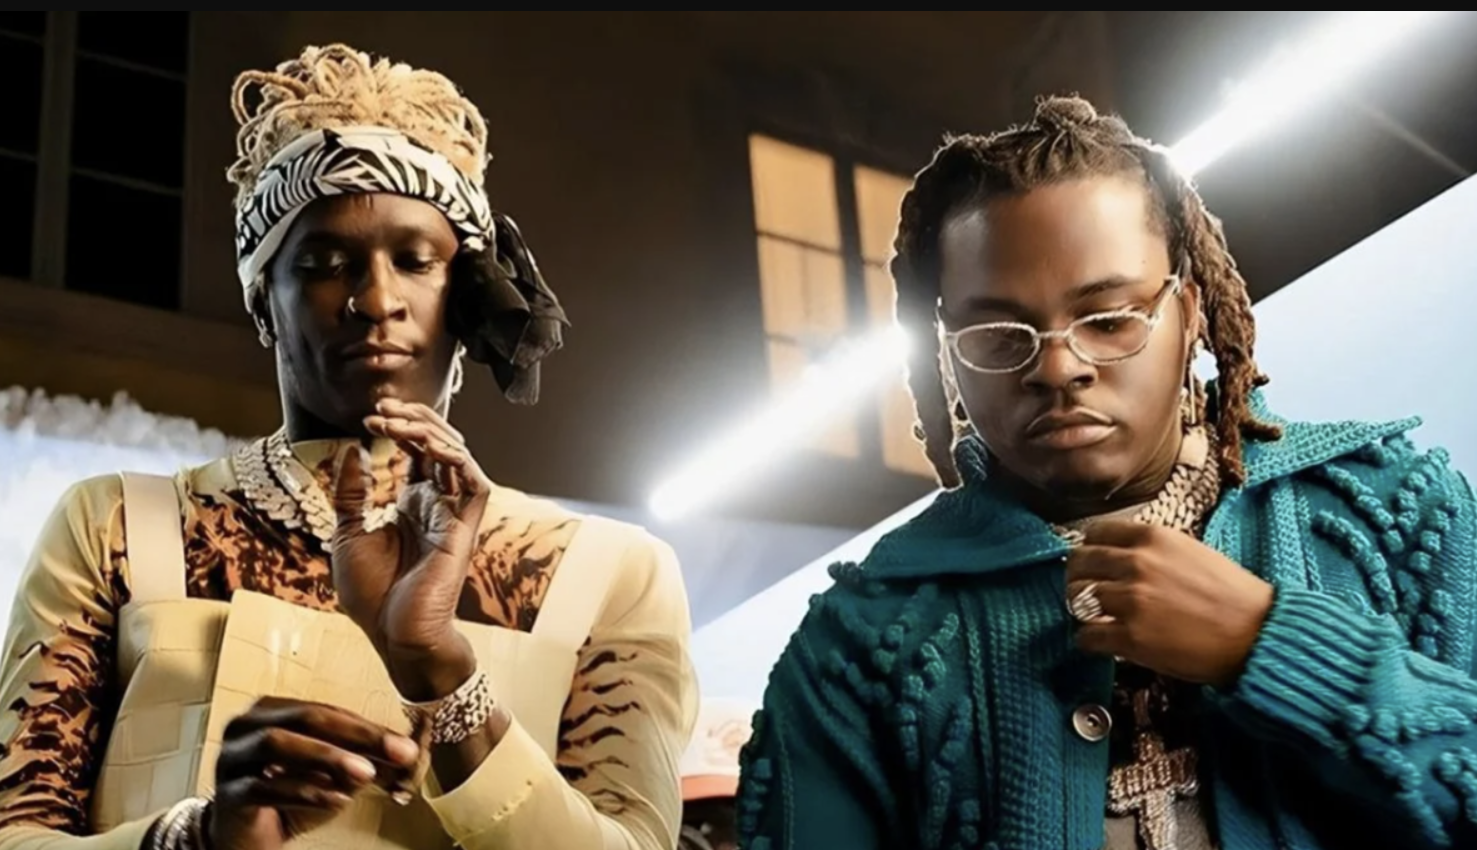 Young Thug's sister defends Gunna and asks people to stop calling him a snitch